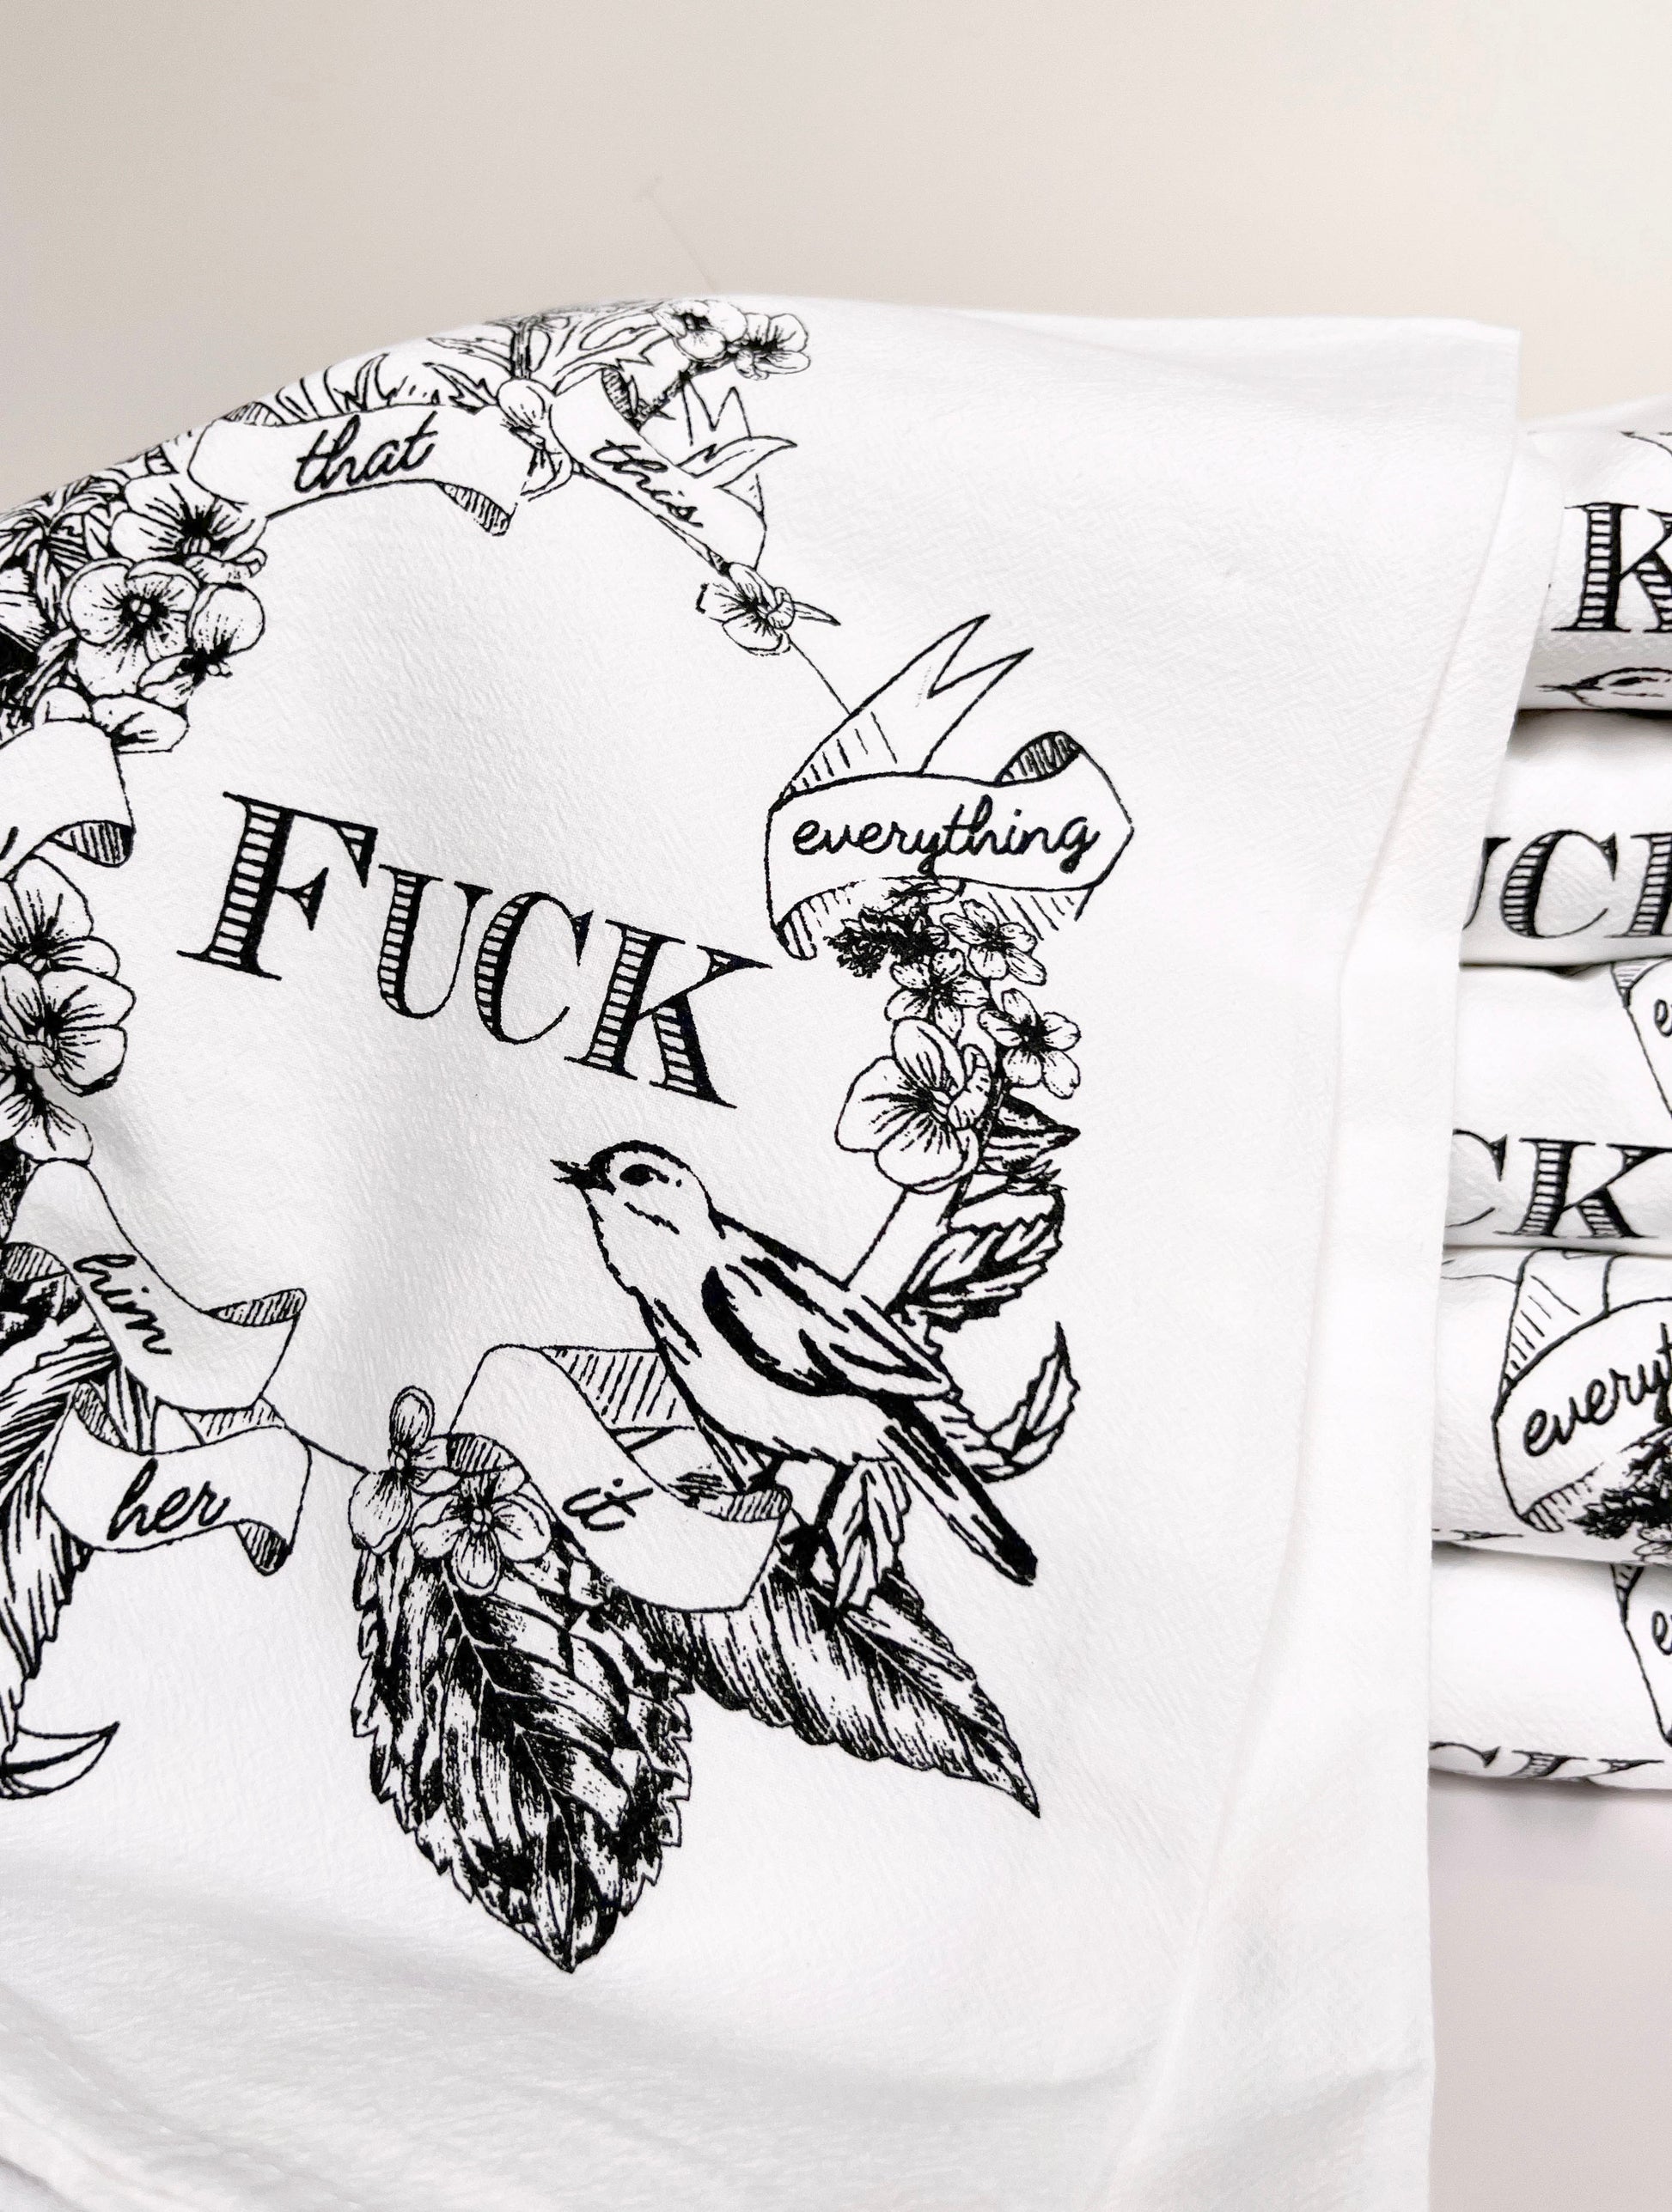 Funny fun kitchen dish tea towel coin laundry fuck this that everything bird with vintage style flowers floral wreath screen print printed coin laundry 